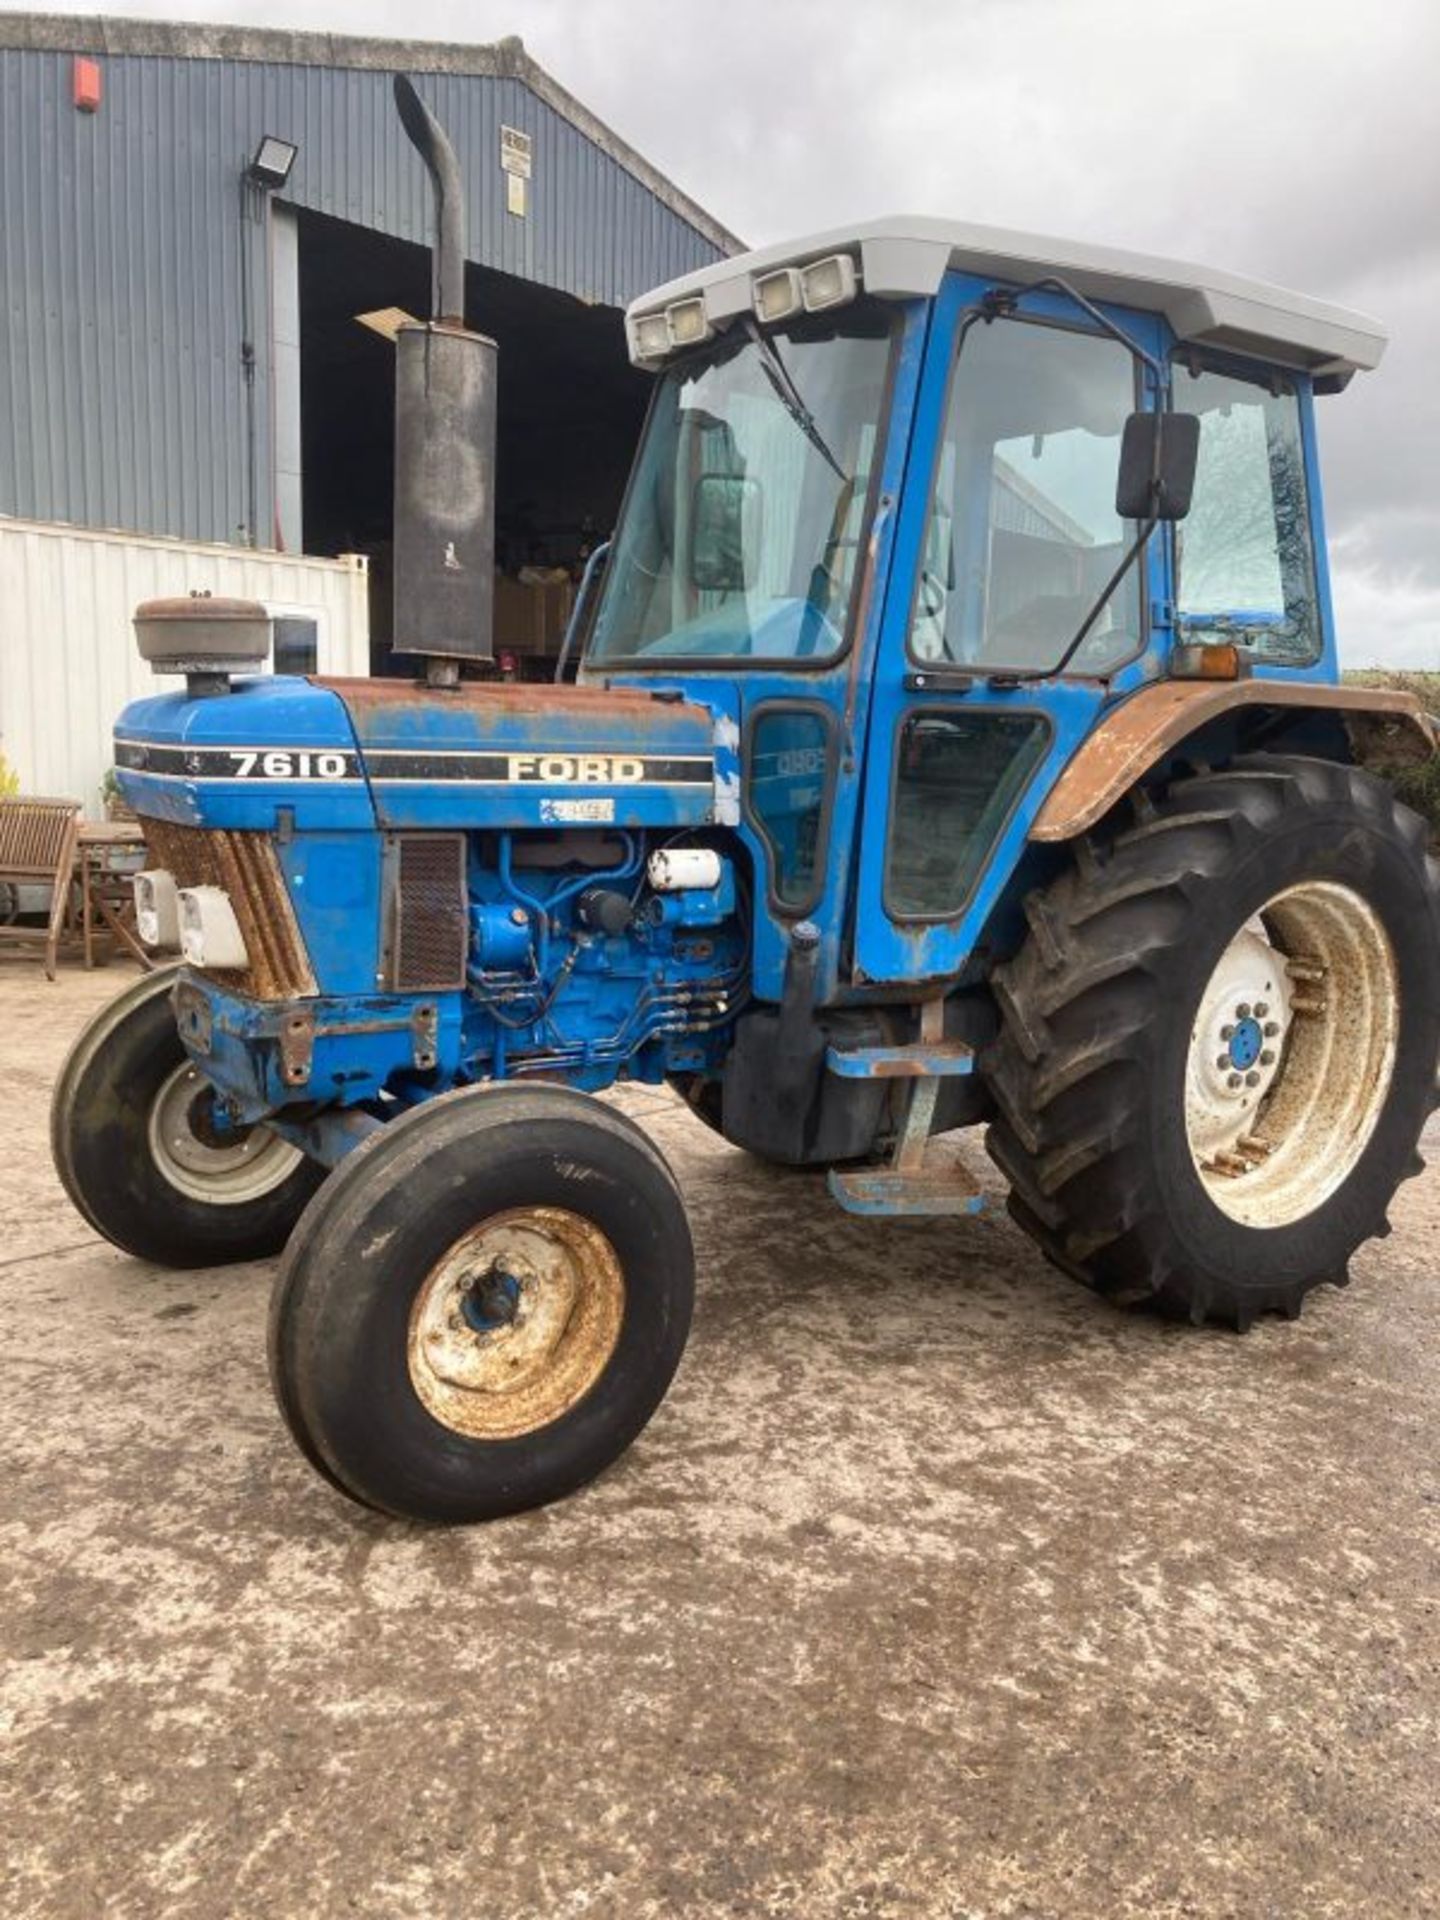 7610 FORD TRACTOR